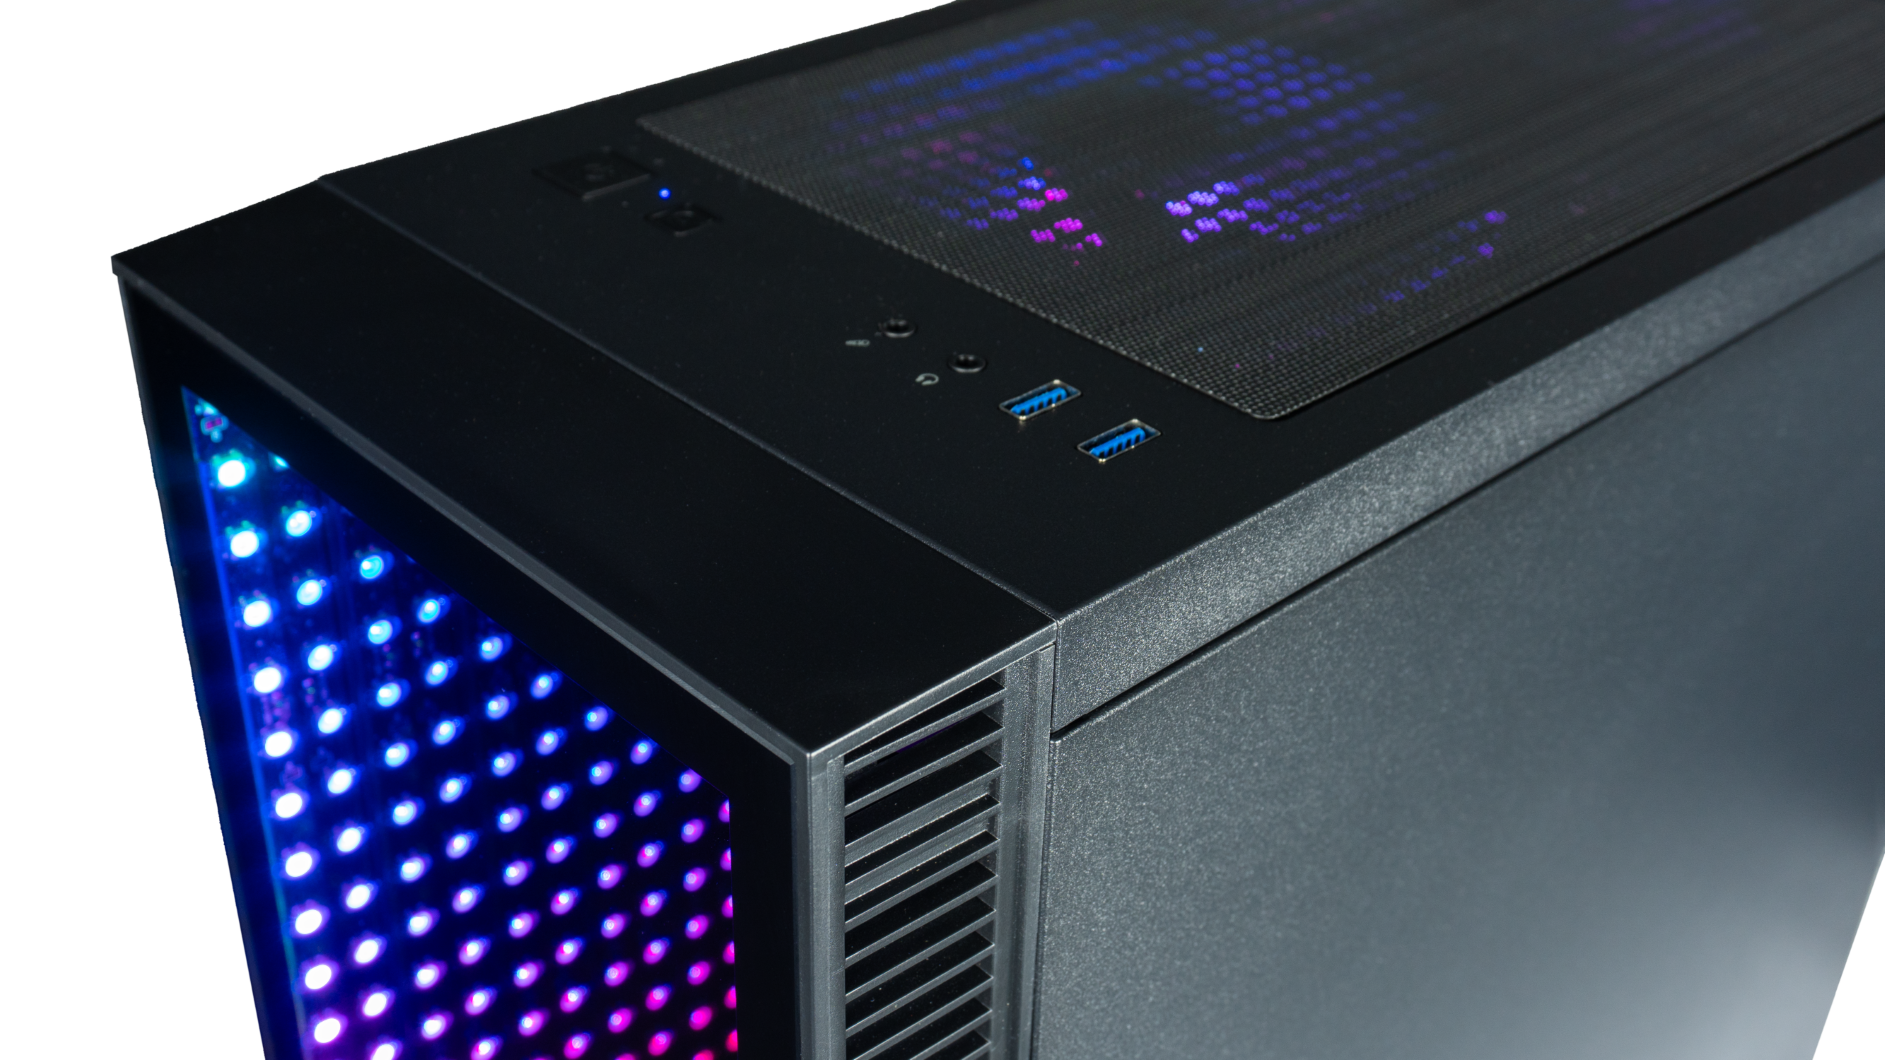 Prebuilt gaming PC options like MSI Trident 3, MSI Aegis, and MSI Codex, can't compare to the Continuum performance and value